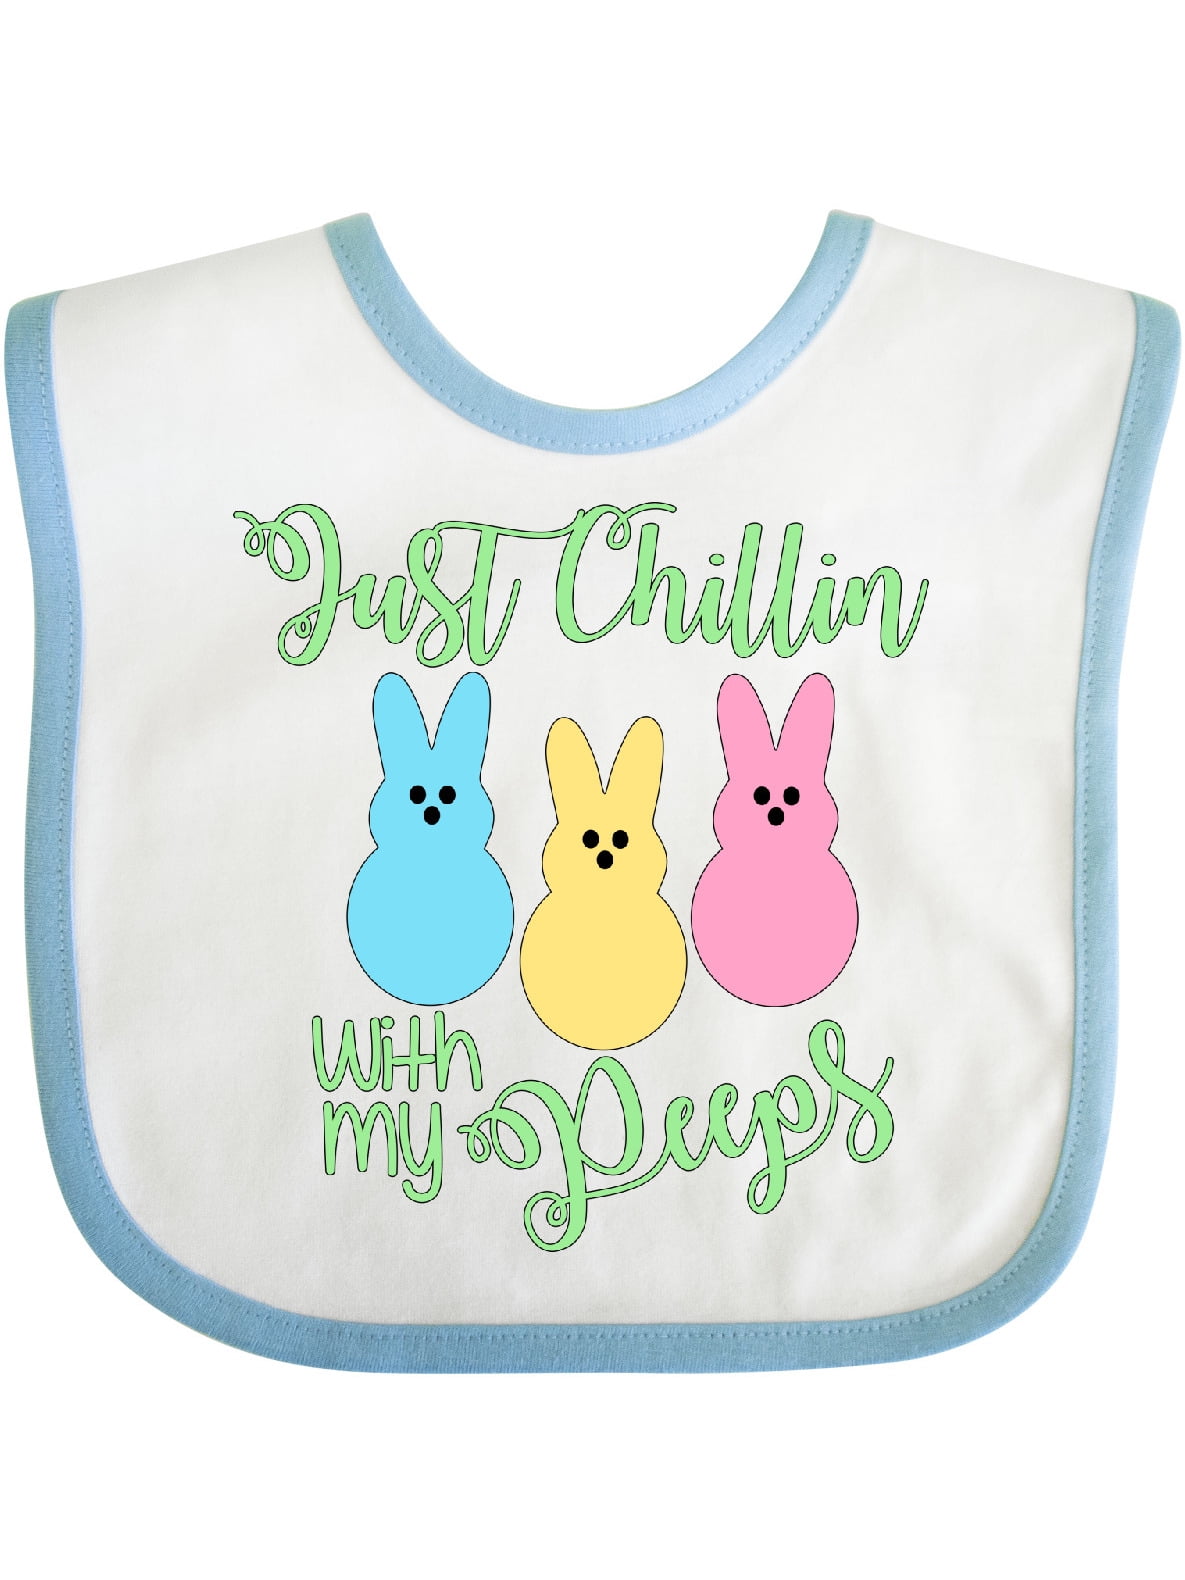 Chillin with my Peeps Easter Bib Easter Bib for Babies and Infants Baby Bib with Easter Design Infant Bib with Cute Design Easter Gift for Baby Soft Terry Cloth 